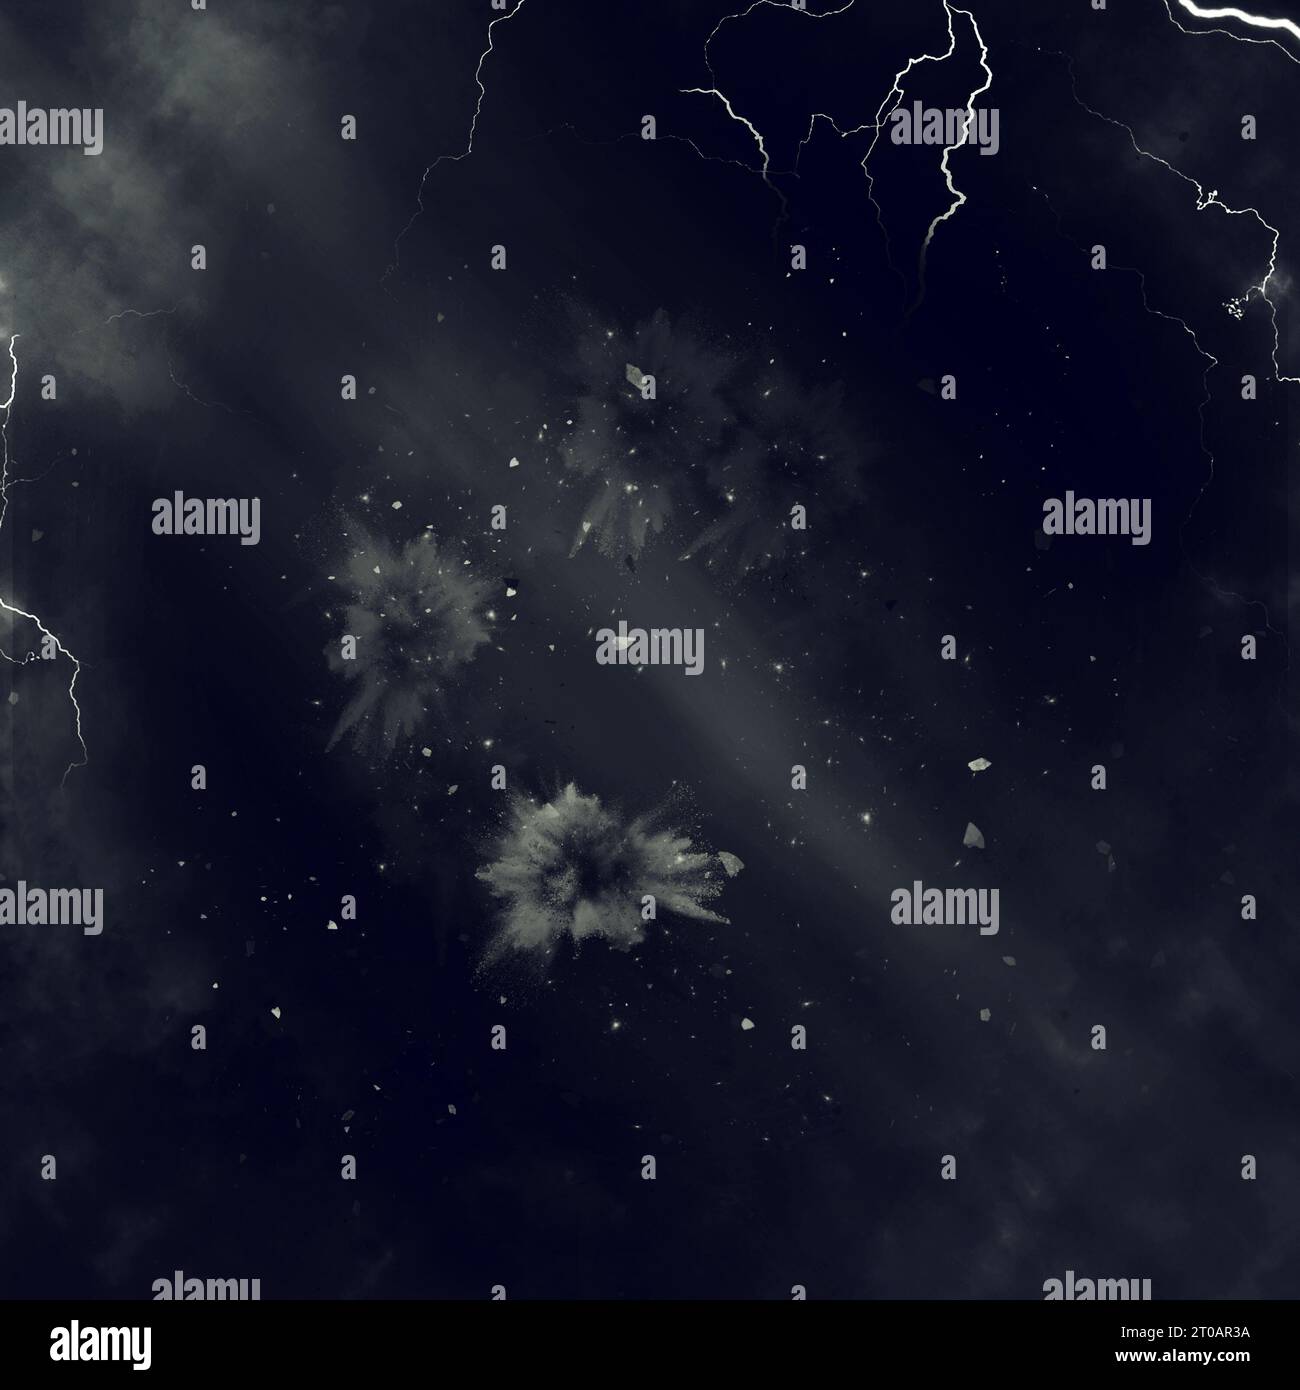 Dark stormy sky with lightning and stars, computer generated abstract background Stock Photo